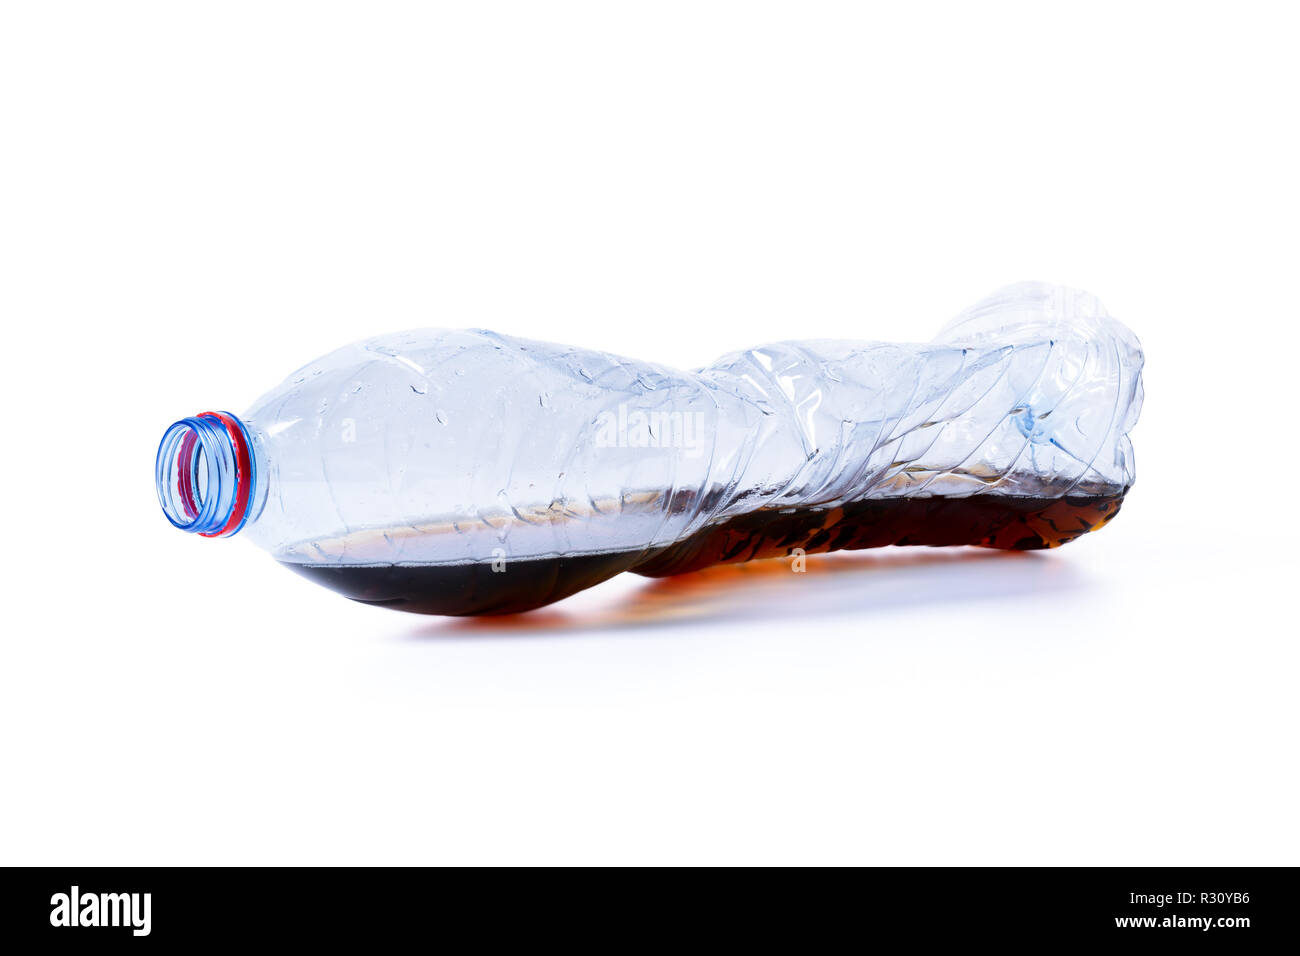 almost empty plastic waste bottle isolated on white background Stock Photo